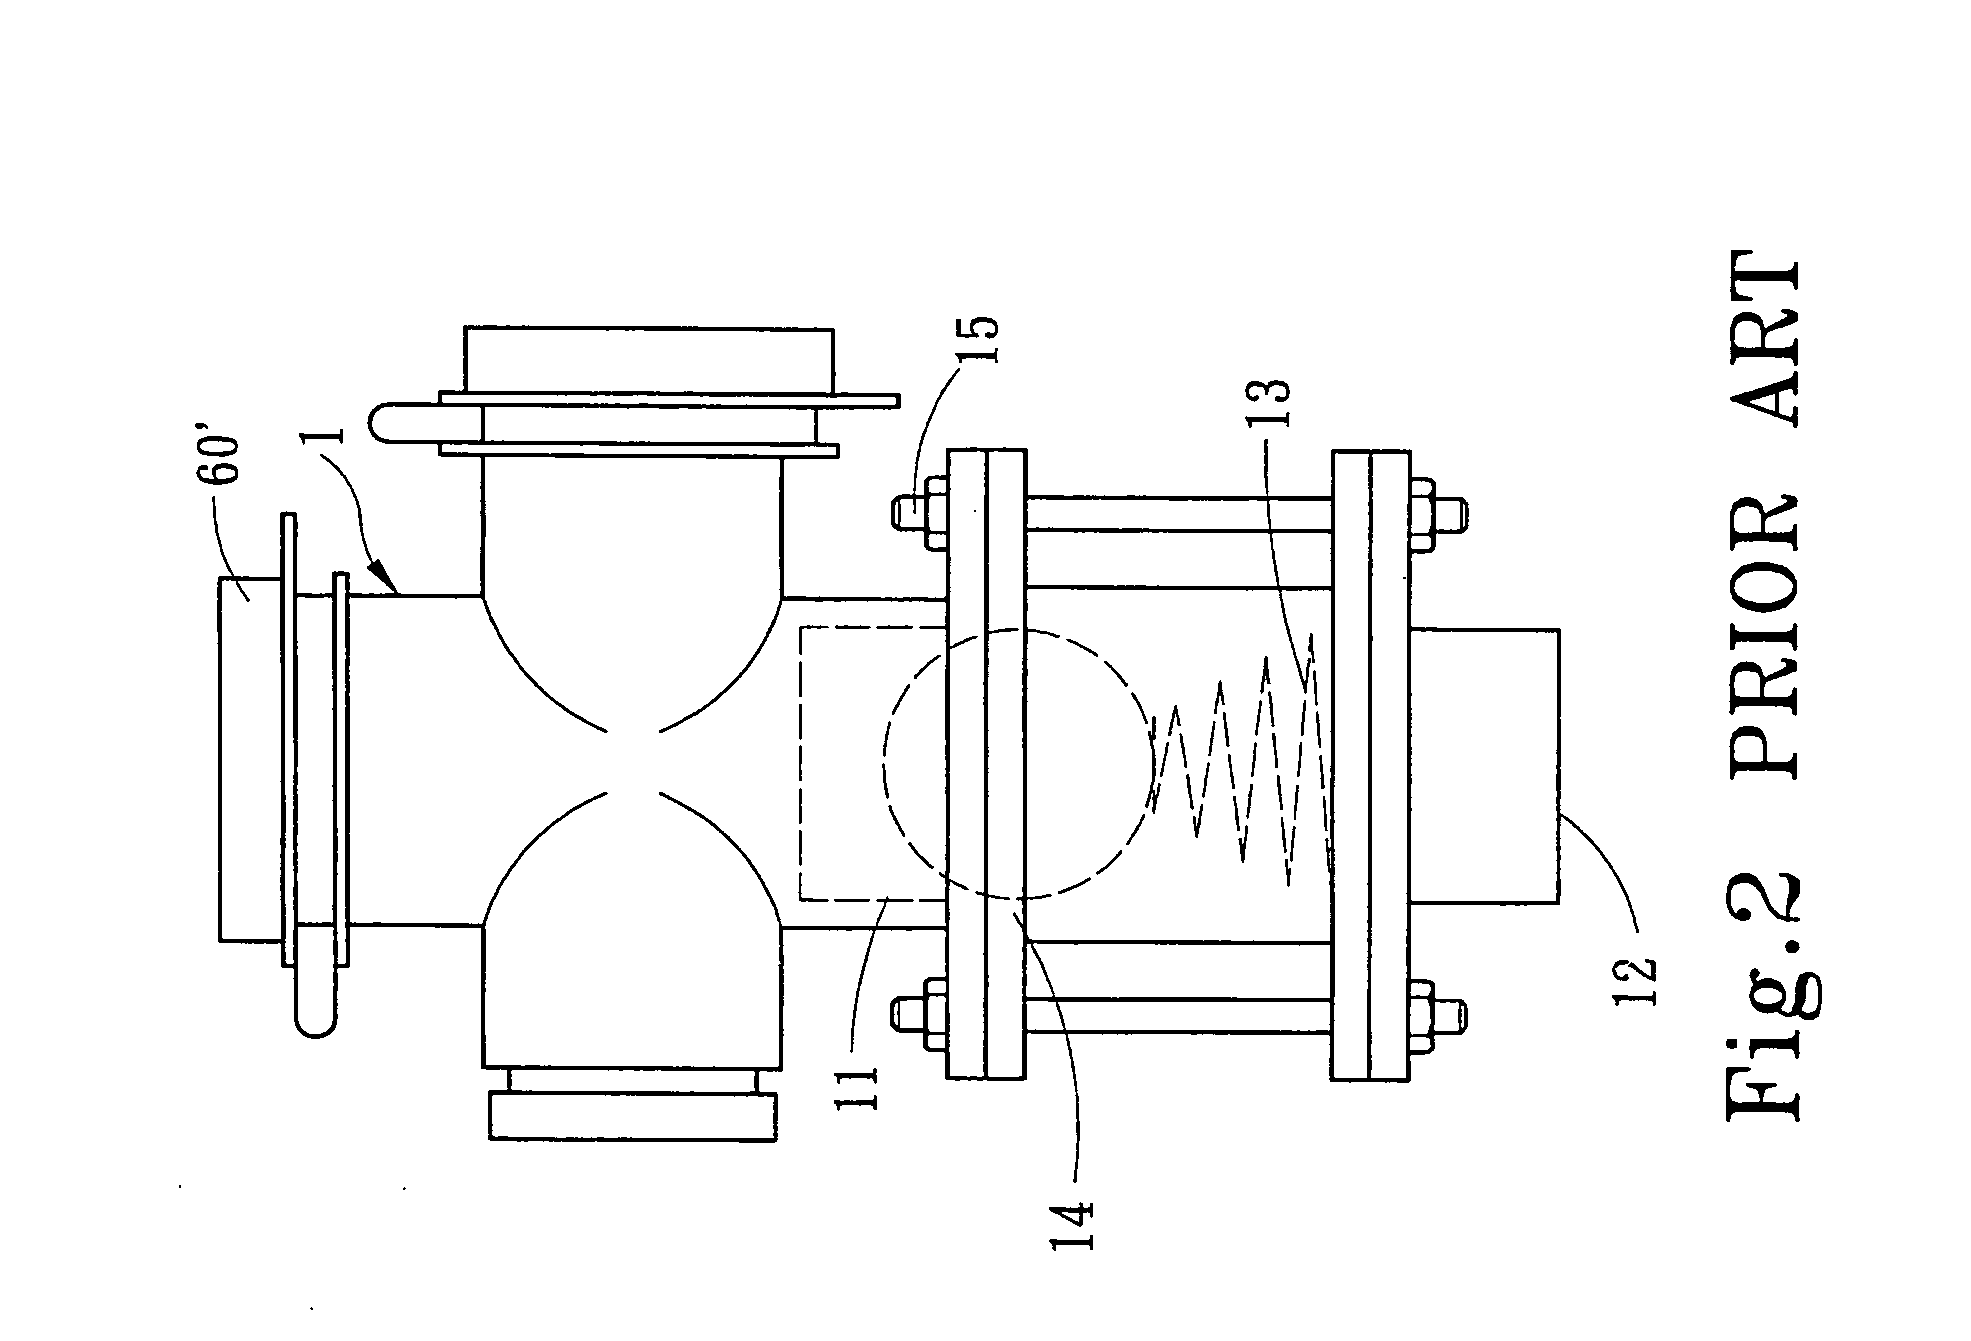 Dual function condensate drain trap for negative or positive pressure air handling unit